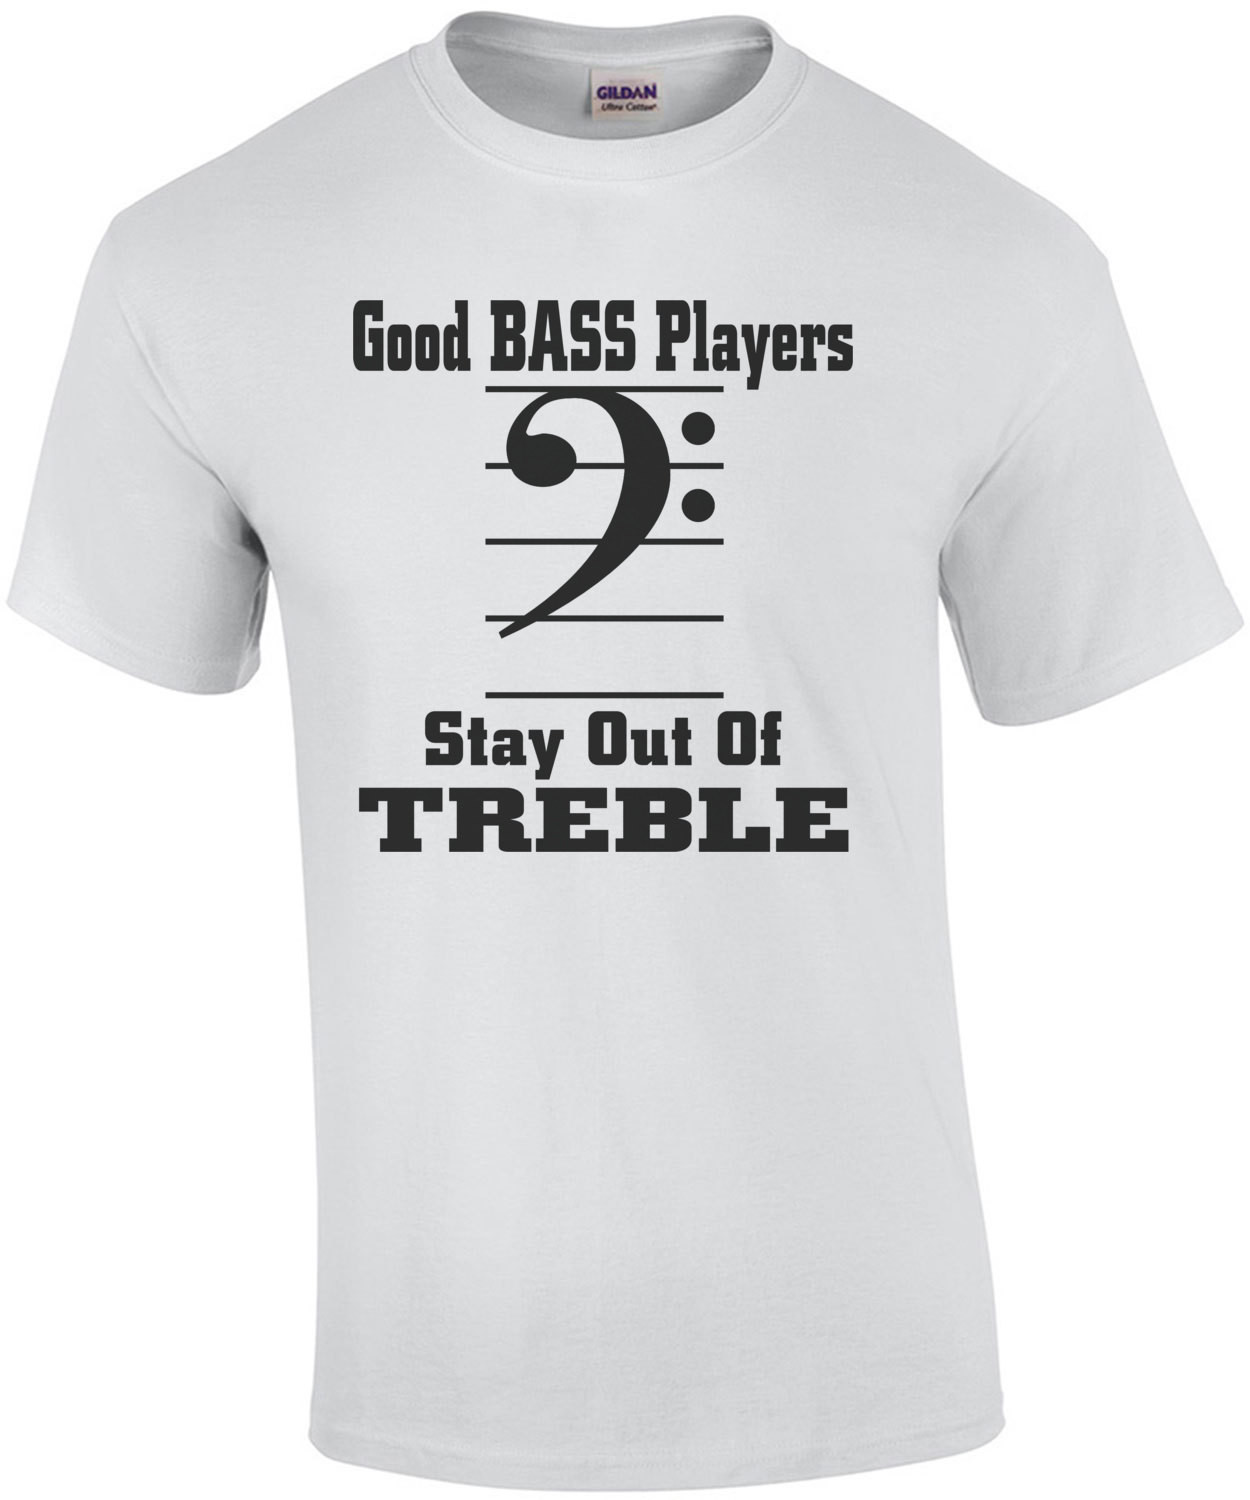 Good Bass Players Stay Out Of Treble T-Shirt